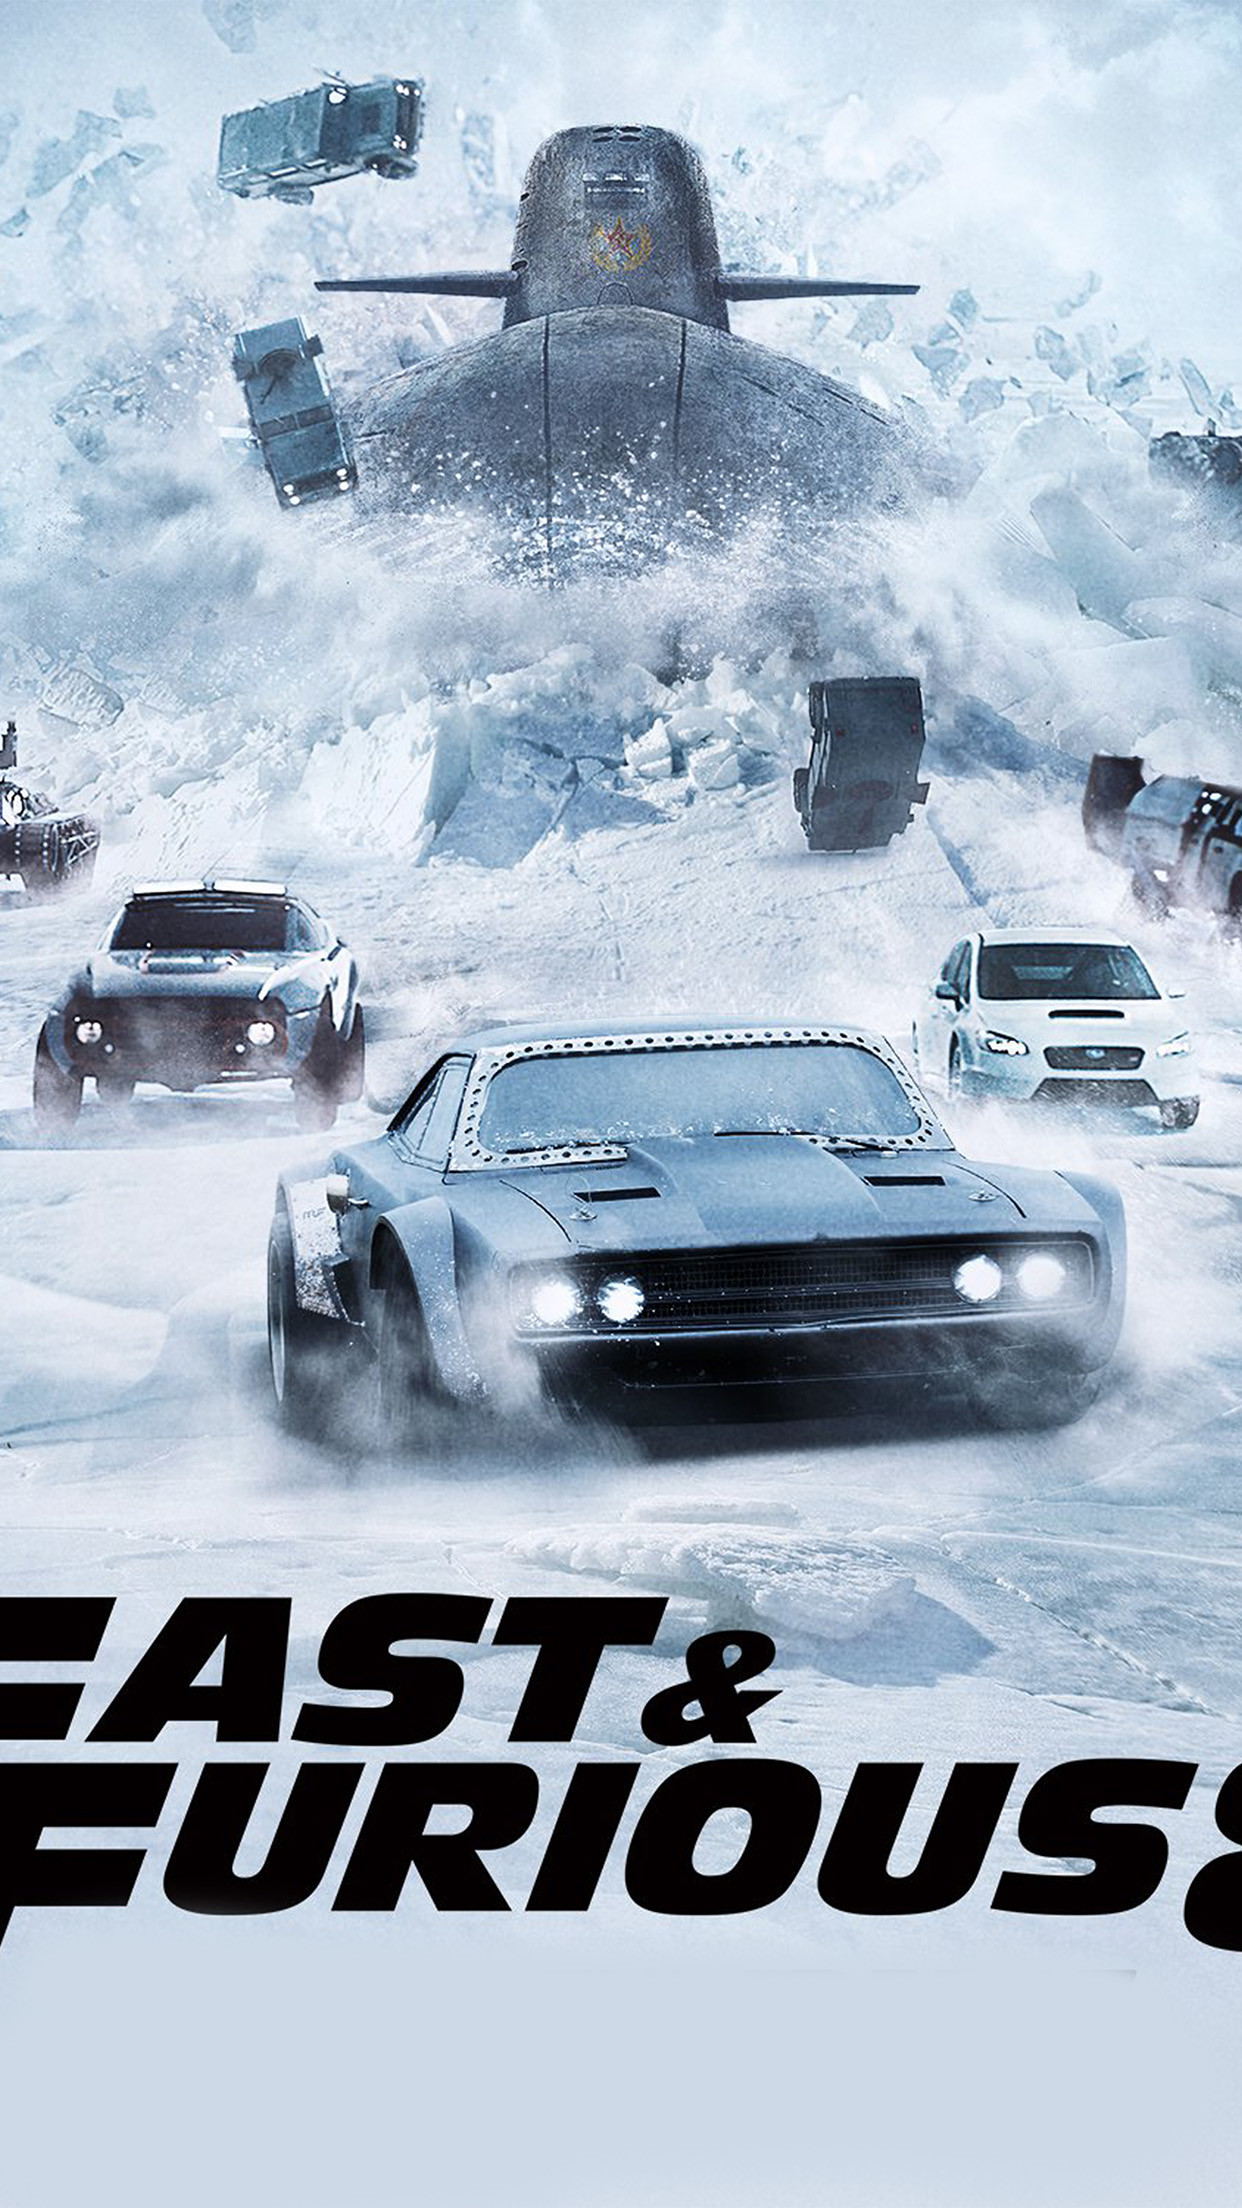 Furious 7 free download